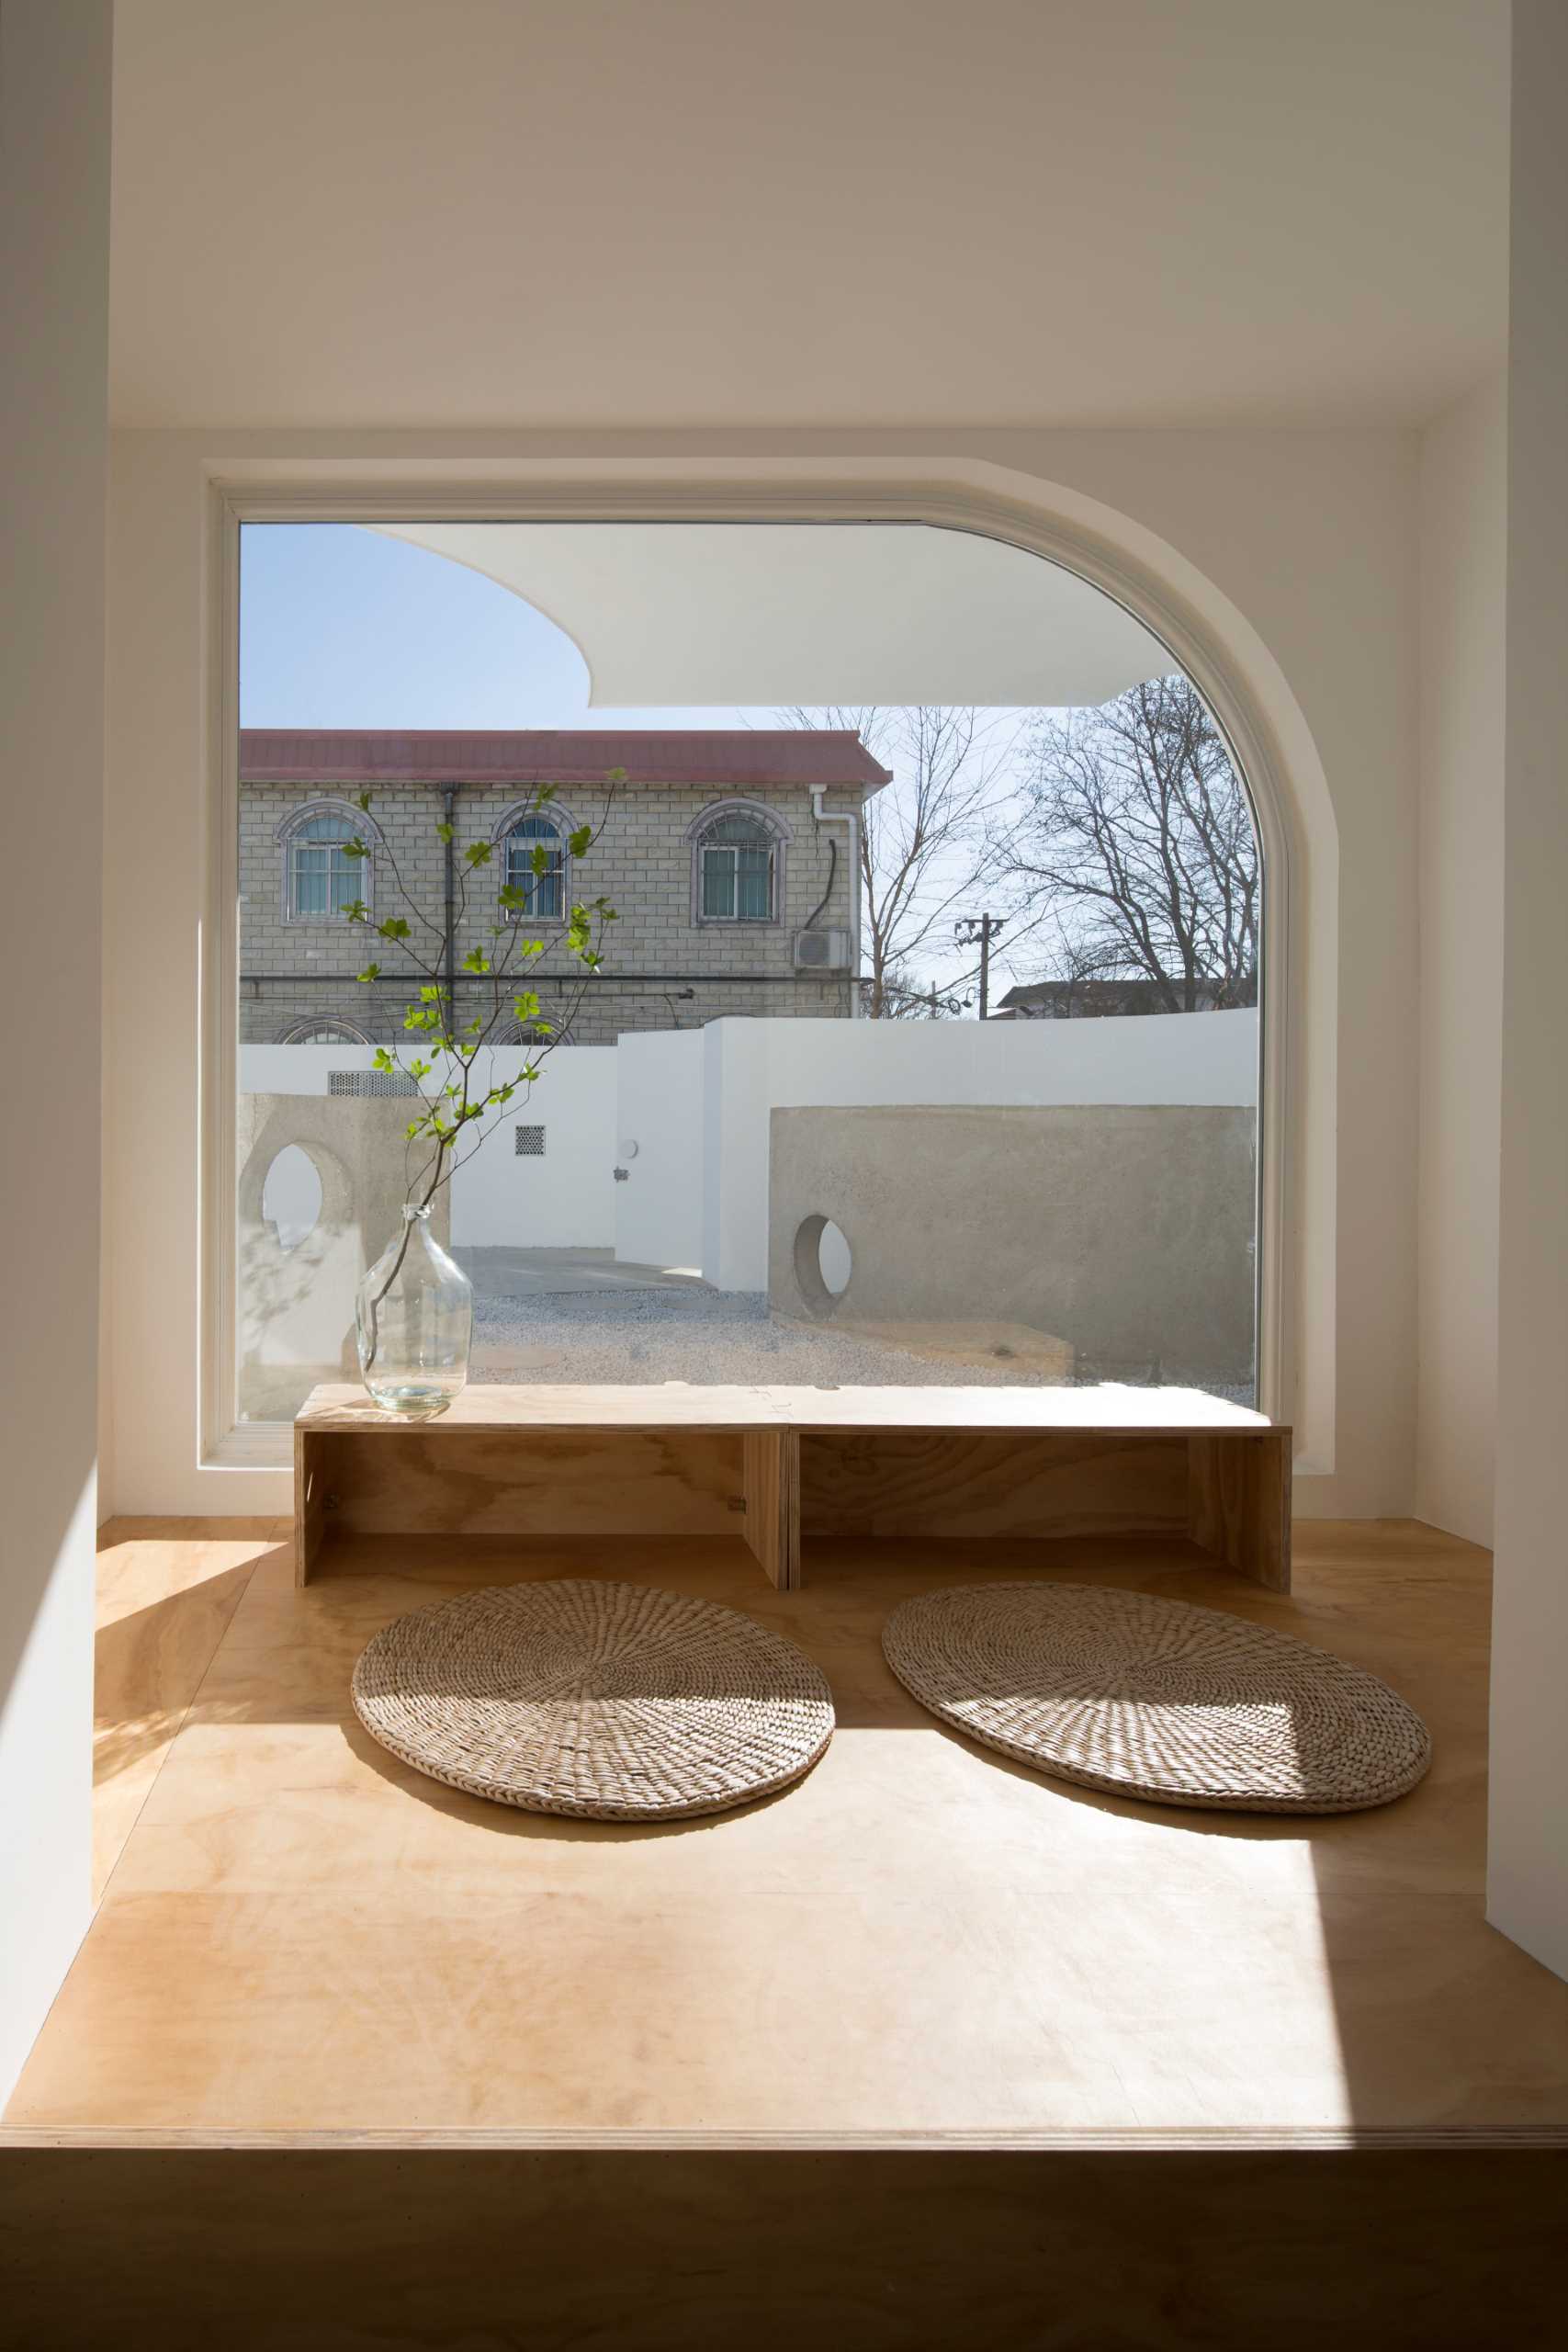 A small sitting area by the front window that provides a view of the courtyard.